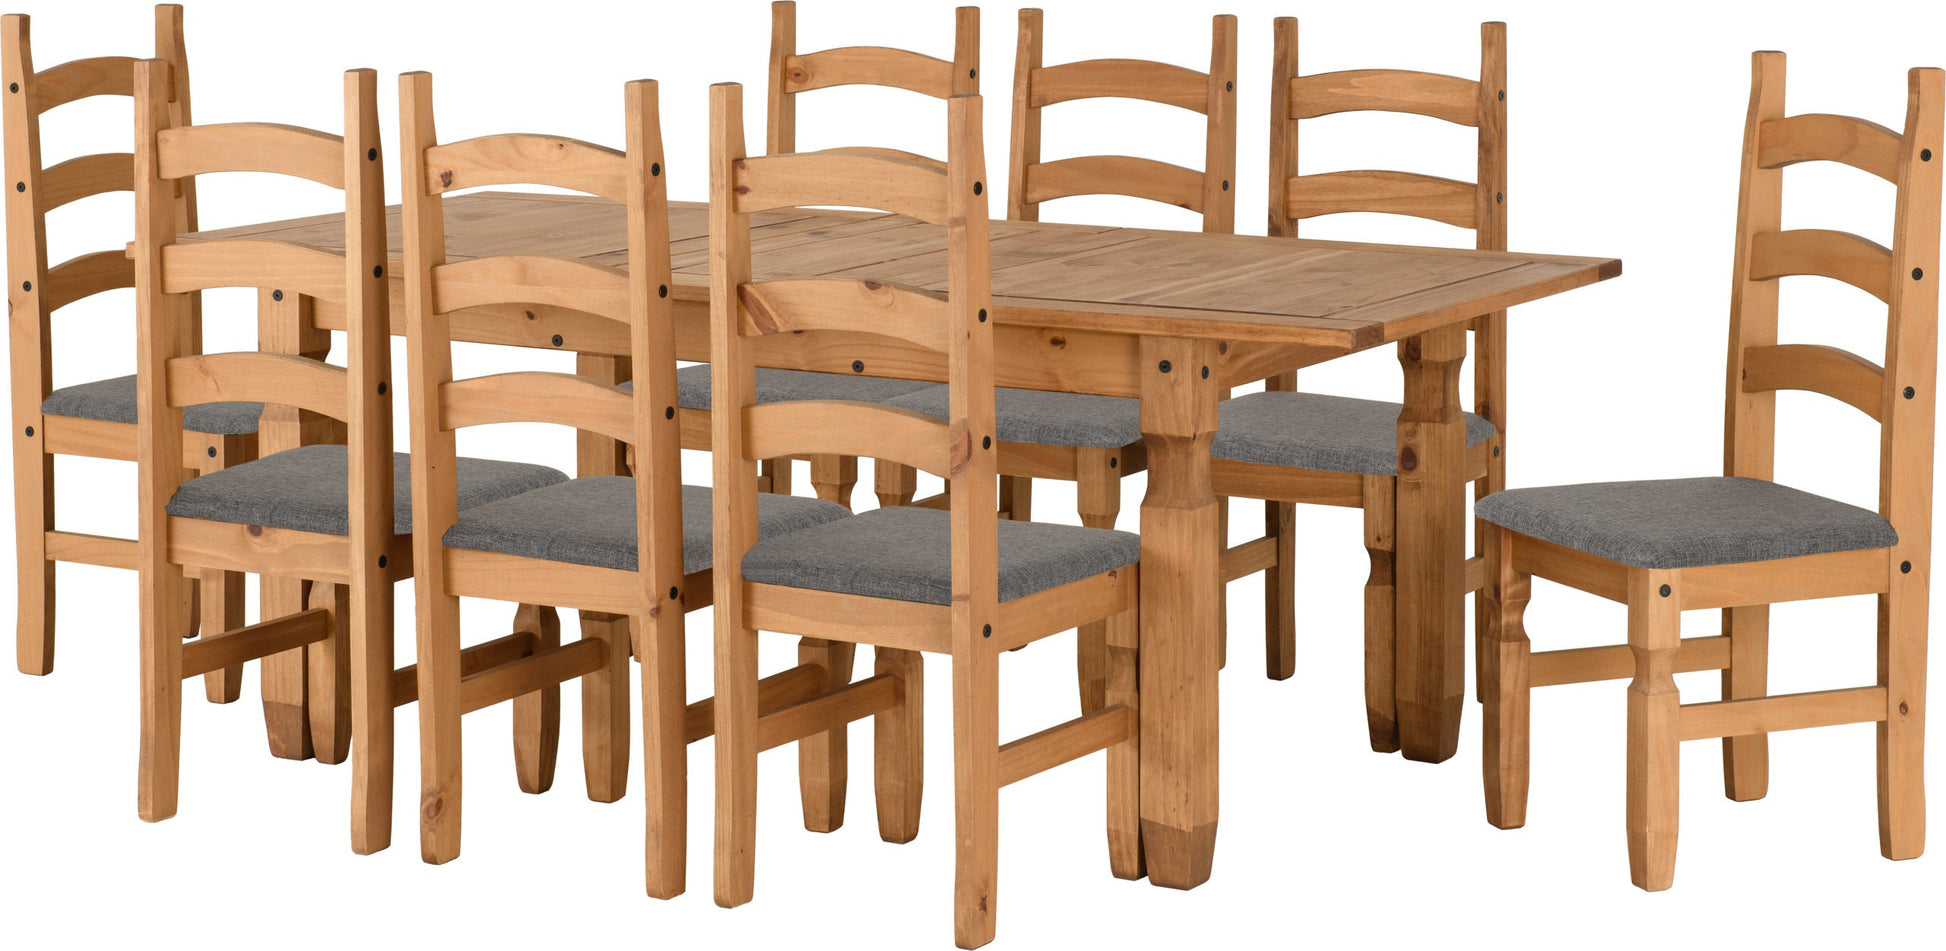 Corona Extending Dining Set (8 Chairs) - Distressed Waxed Pine/Grey Fabric